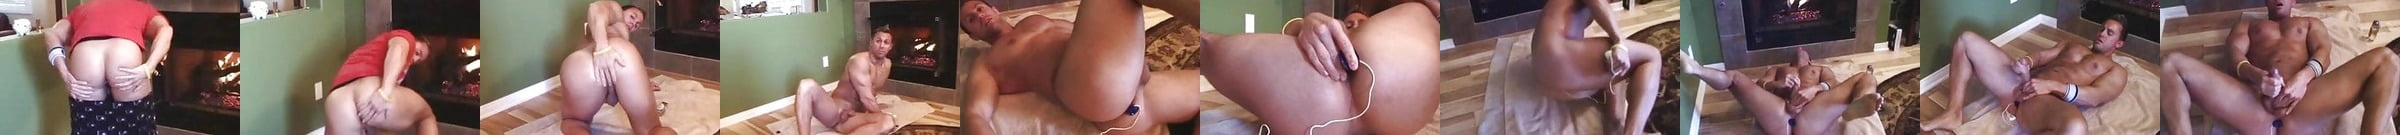 Featured Vibrator Gay Porn Videos 2 Xhamster